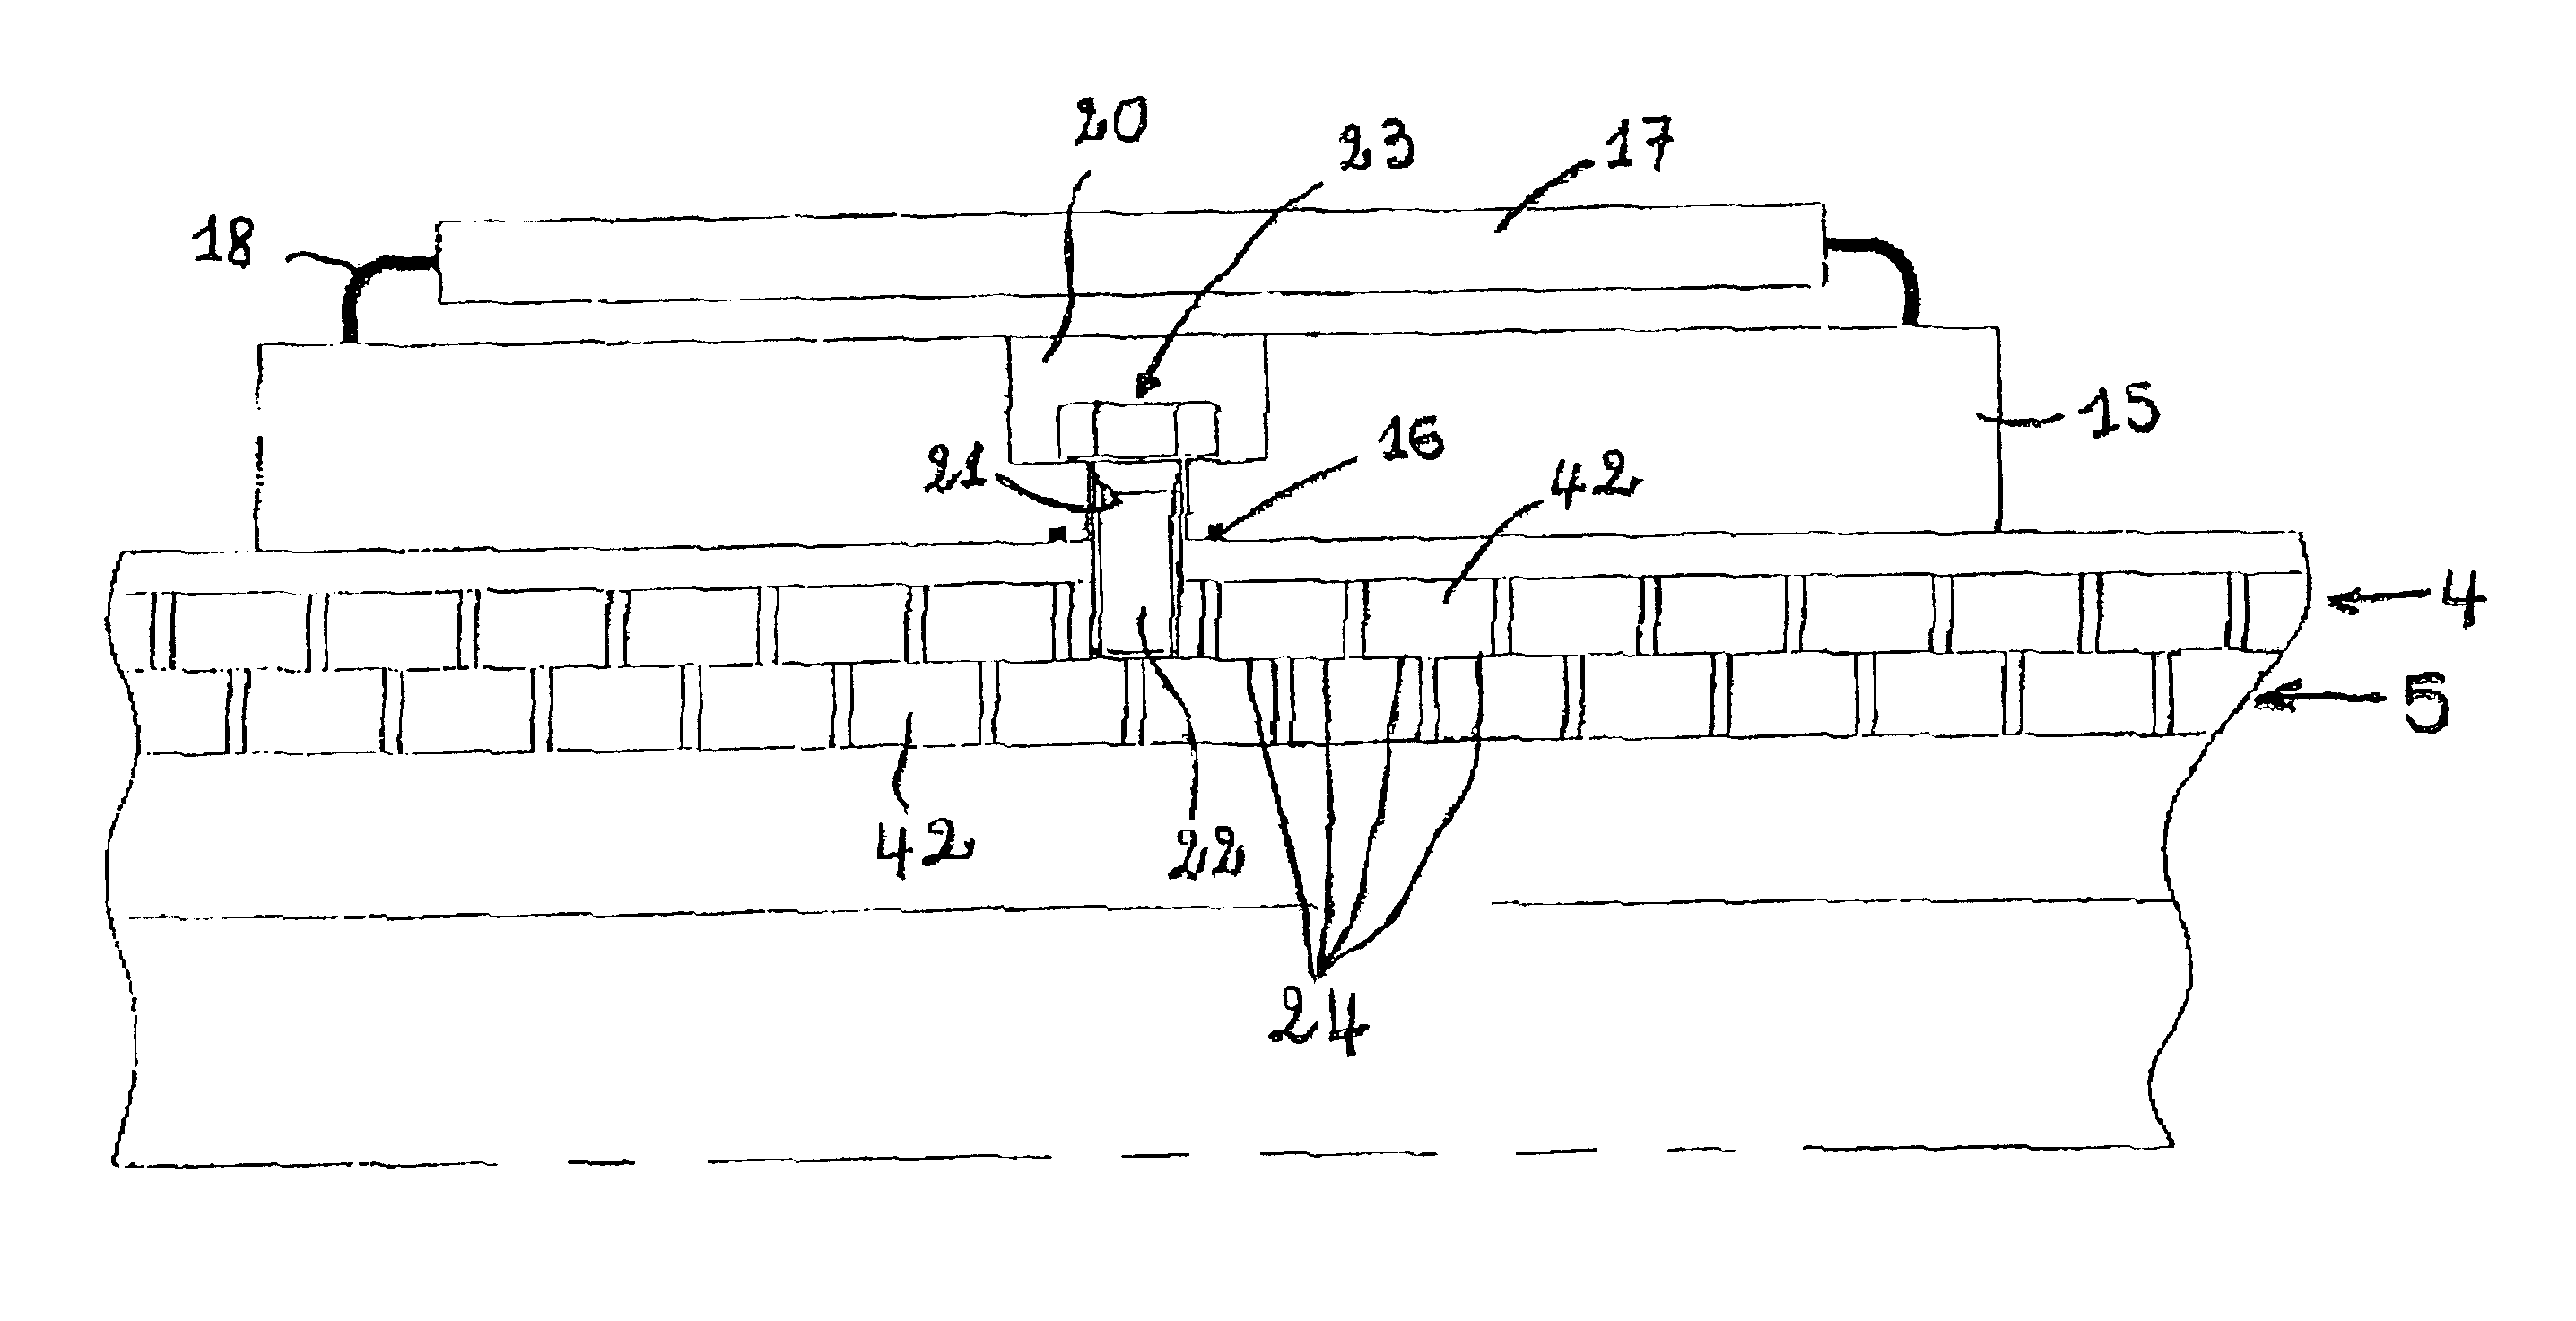 Cathodic protection device for flexible pipes